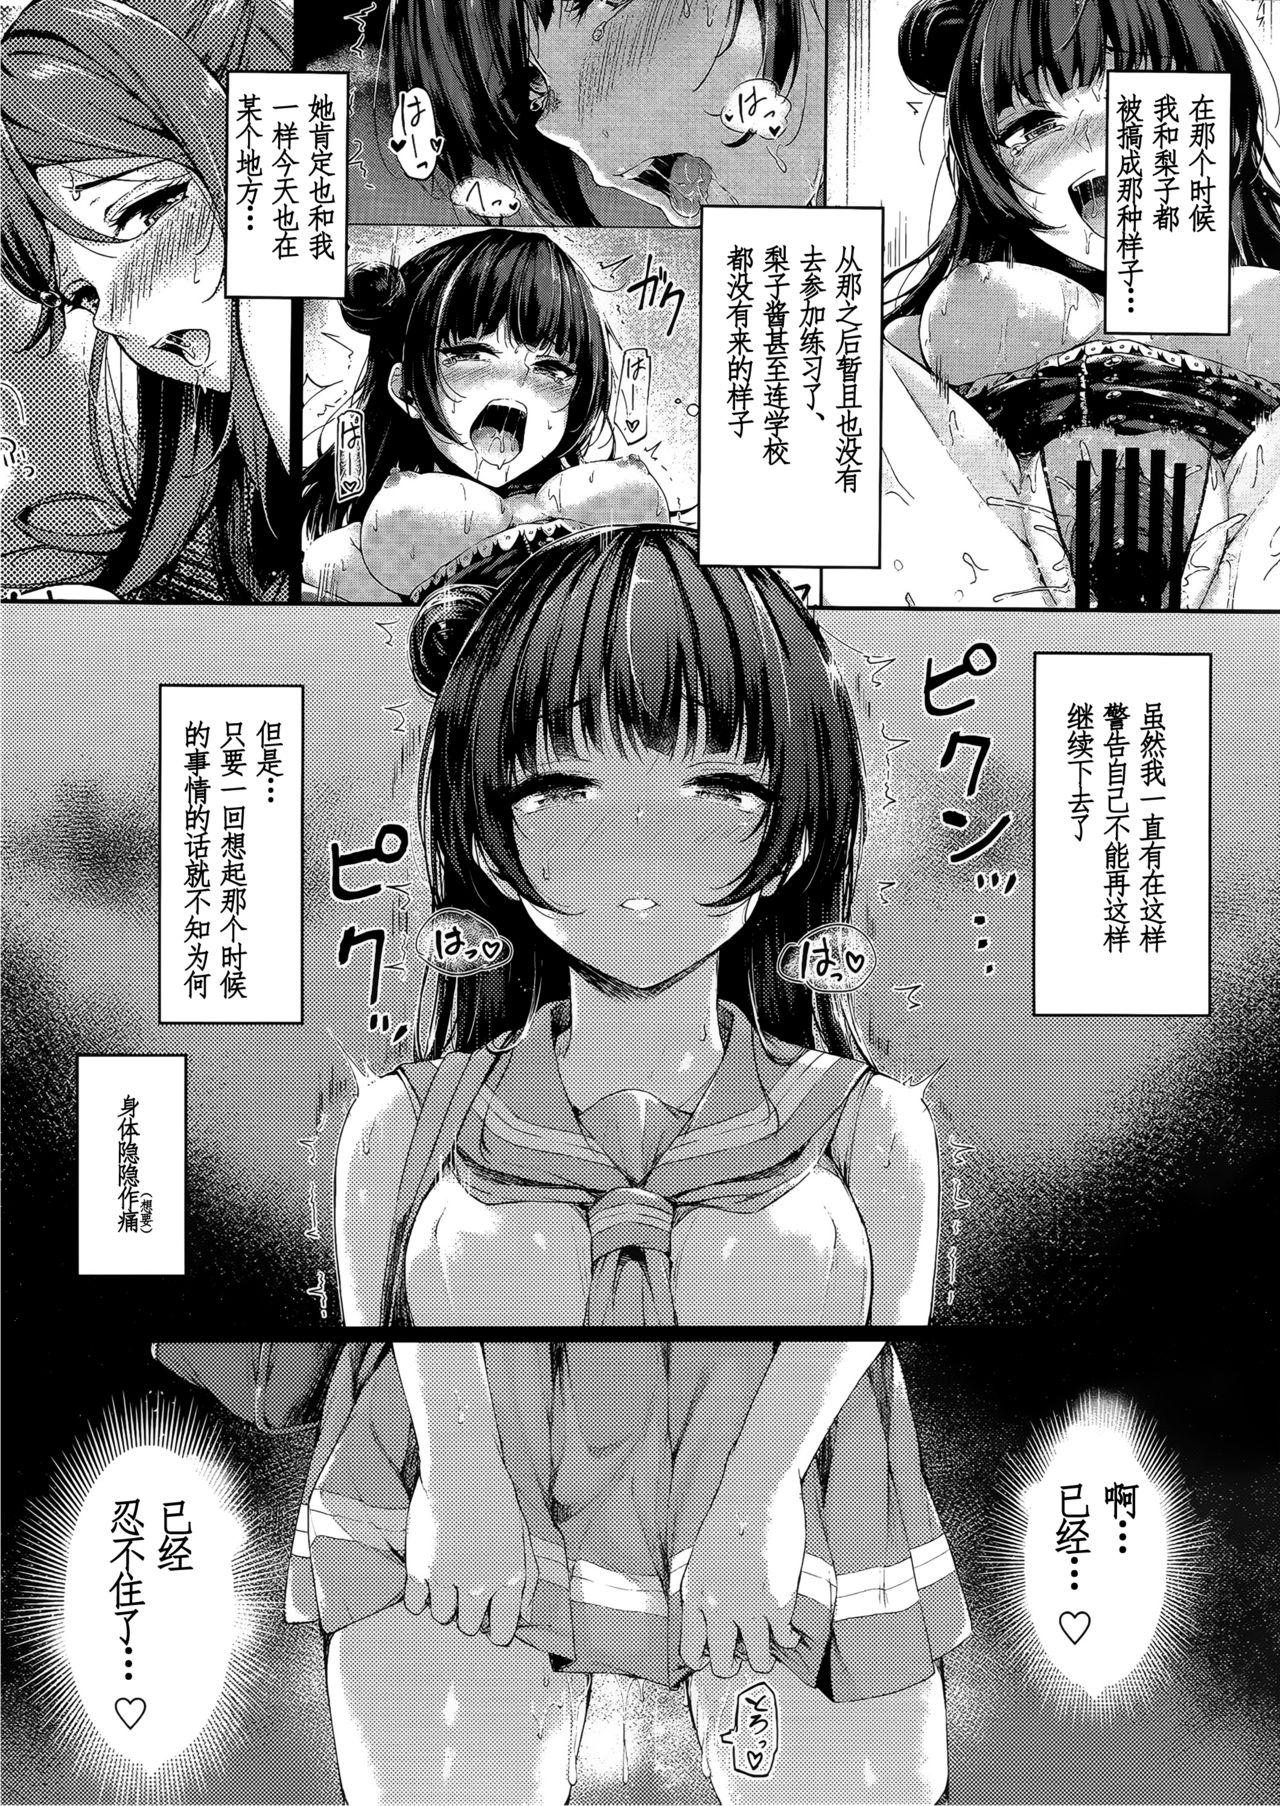 Red Datenshi Corruption II - Love live sunshine Riding Cock - Page 4